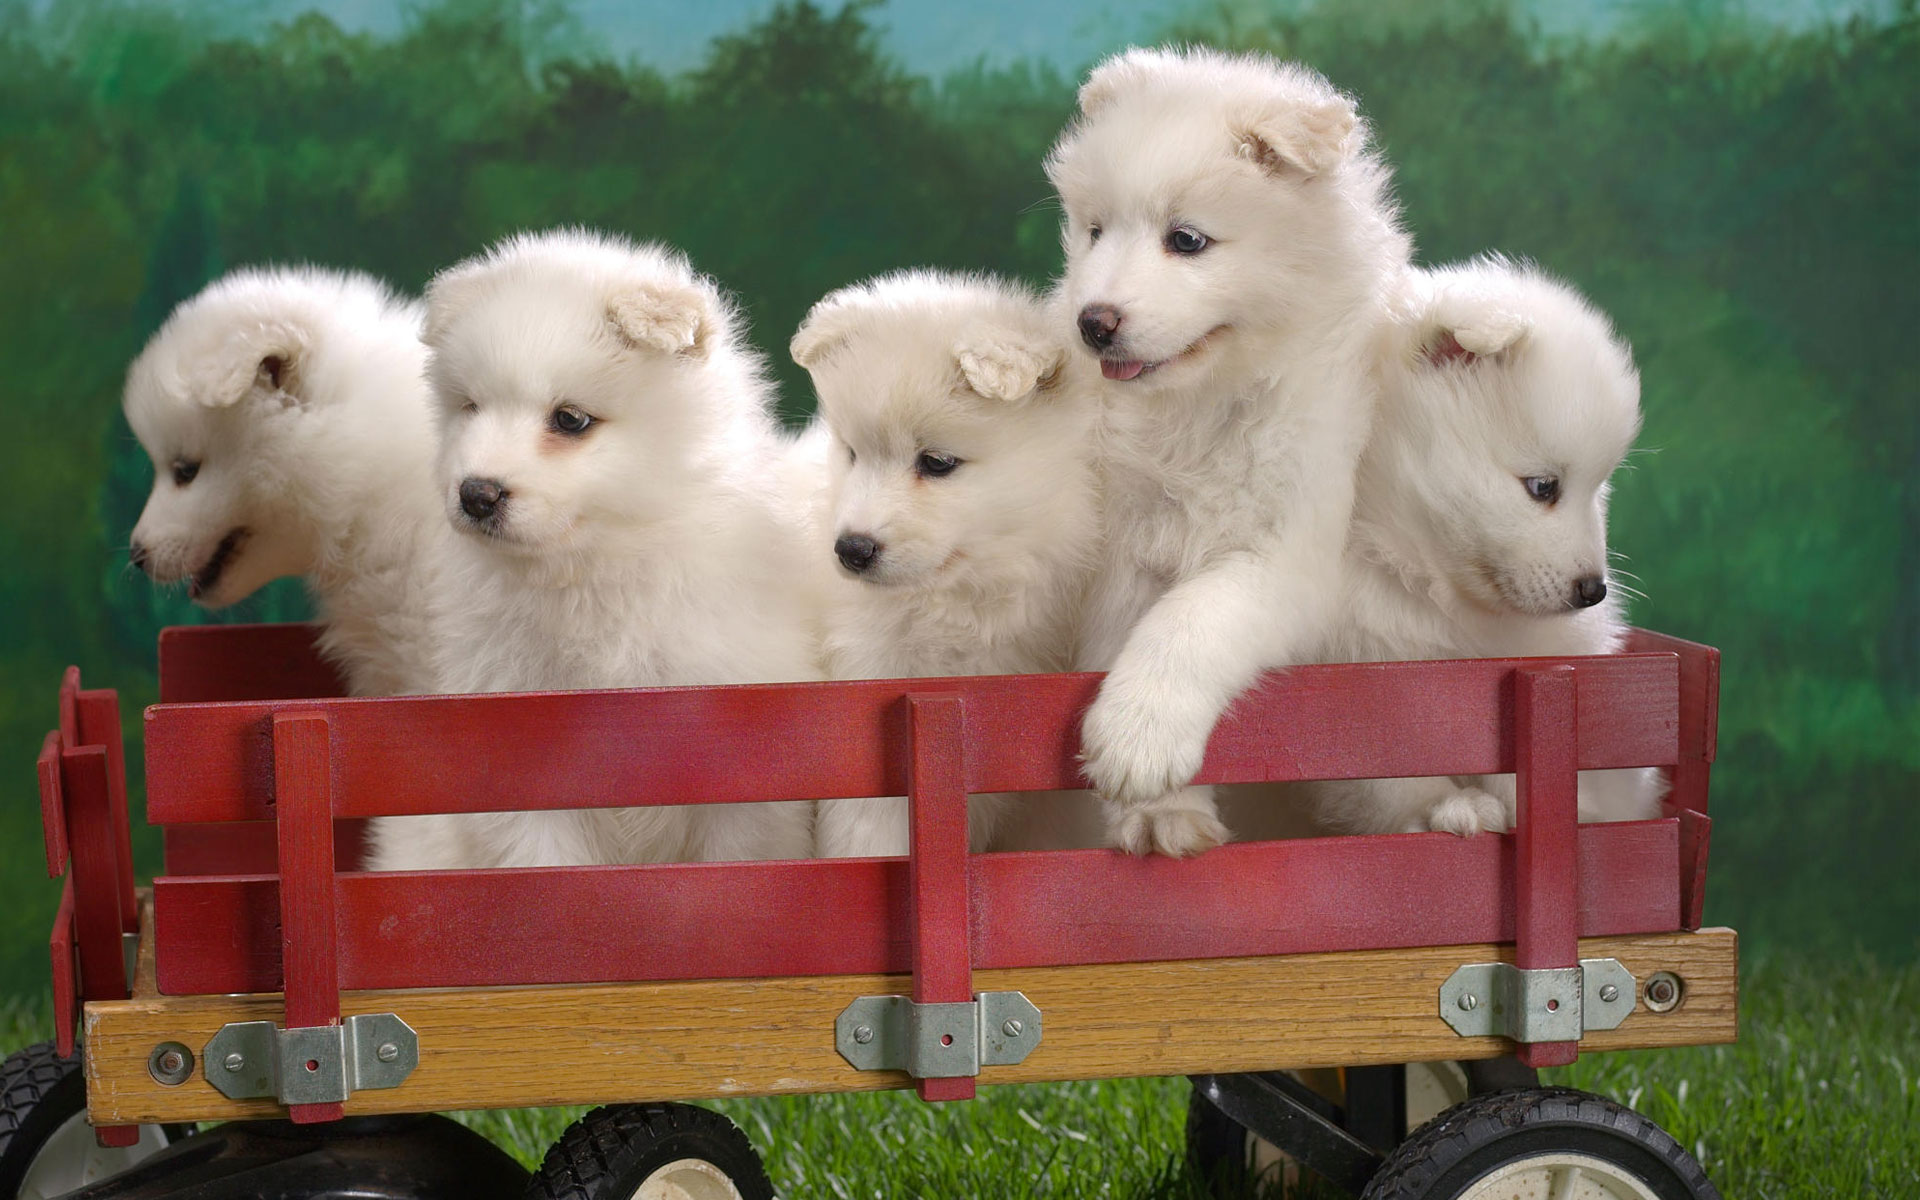 Wagonload of Samoyed Puppies142112293 - Wagonload of Samoyed Puppies - Wagonload, Samoyed, Puppies, Papillon